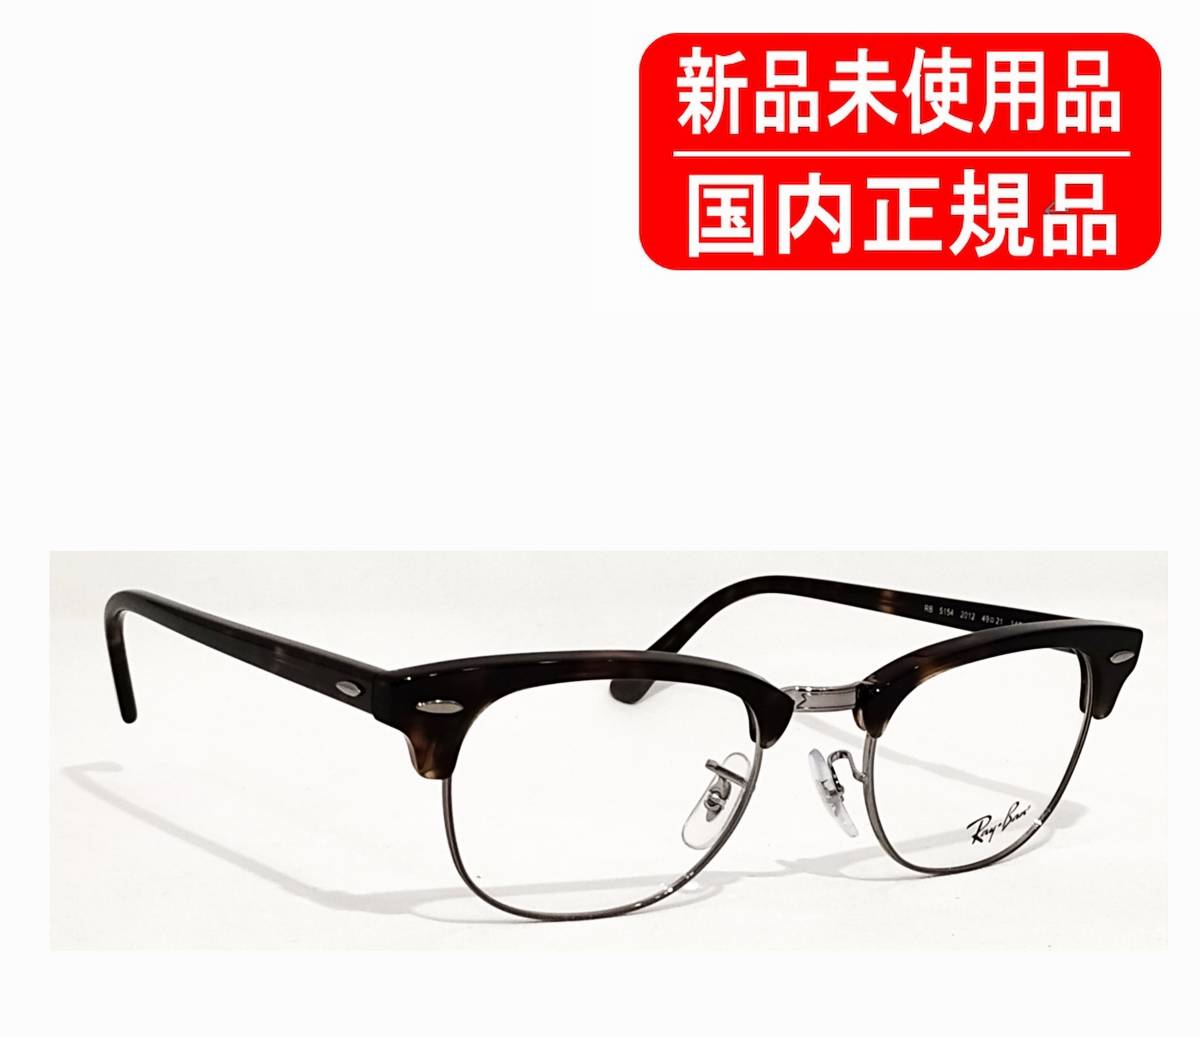  domestic regular goods Ray-Ban CLUBMASTER OPTICS RB5154 2012 49-21 RX5154 RayBan Clubmaster frame glasses written guarantee 